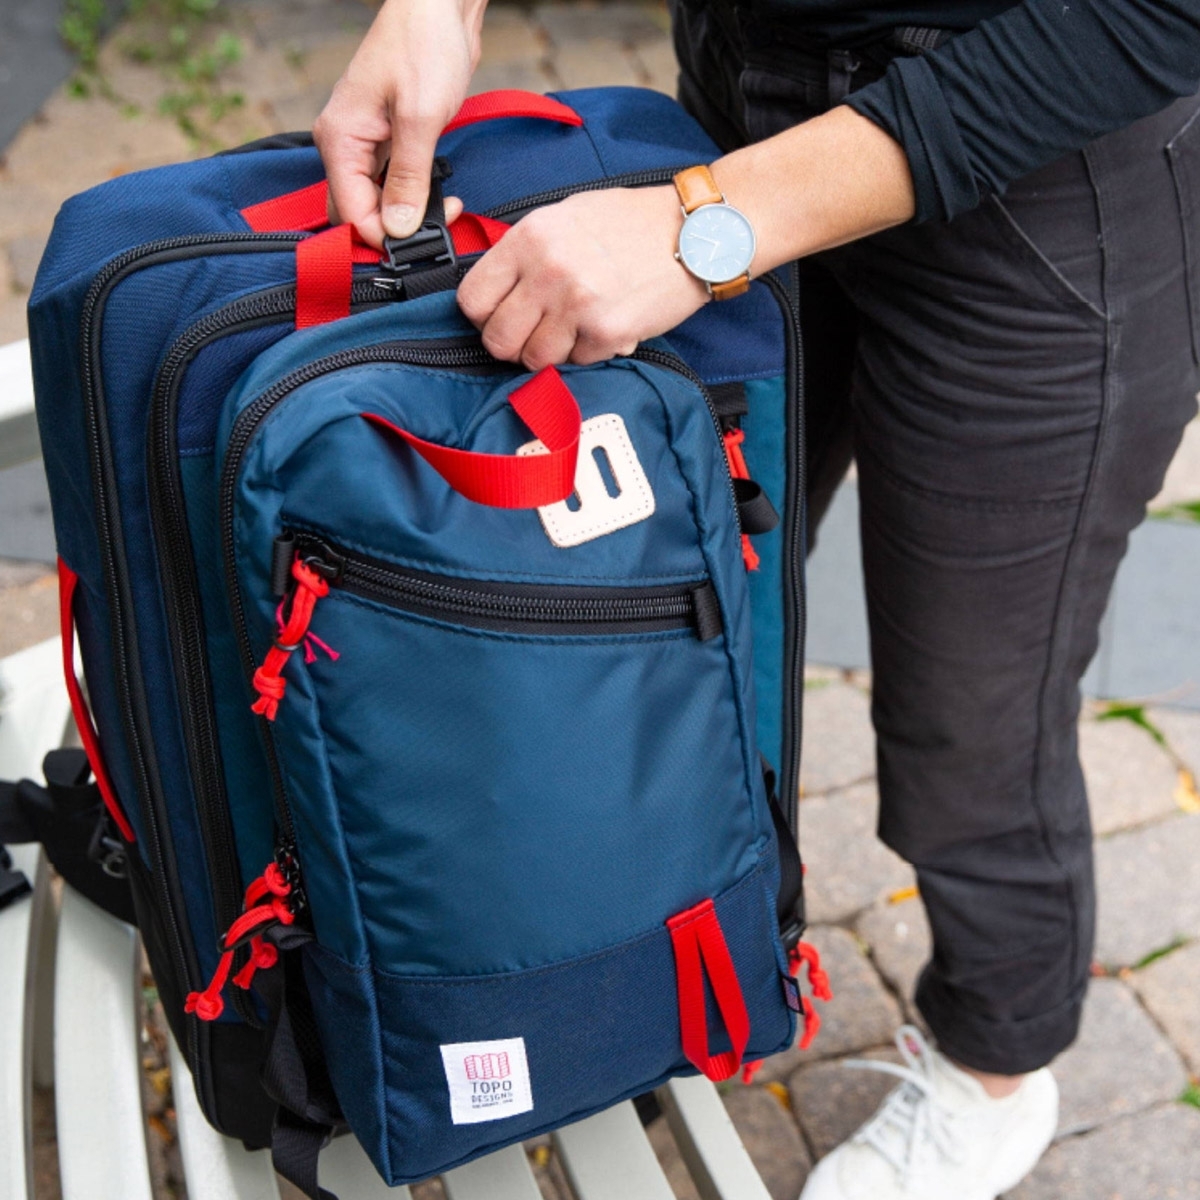 Topo Designs Backpacks And Luggage AdventureReady Bags With A Retro Feel   BroBible